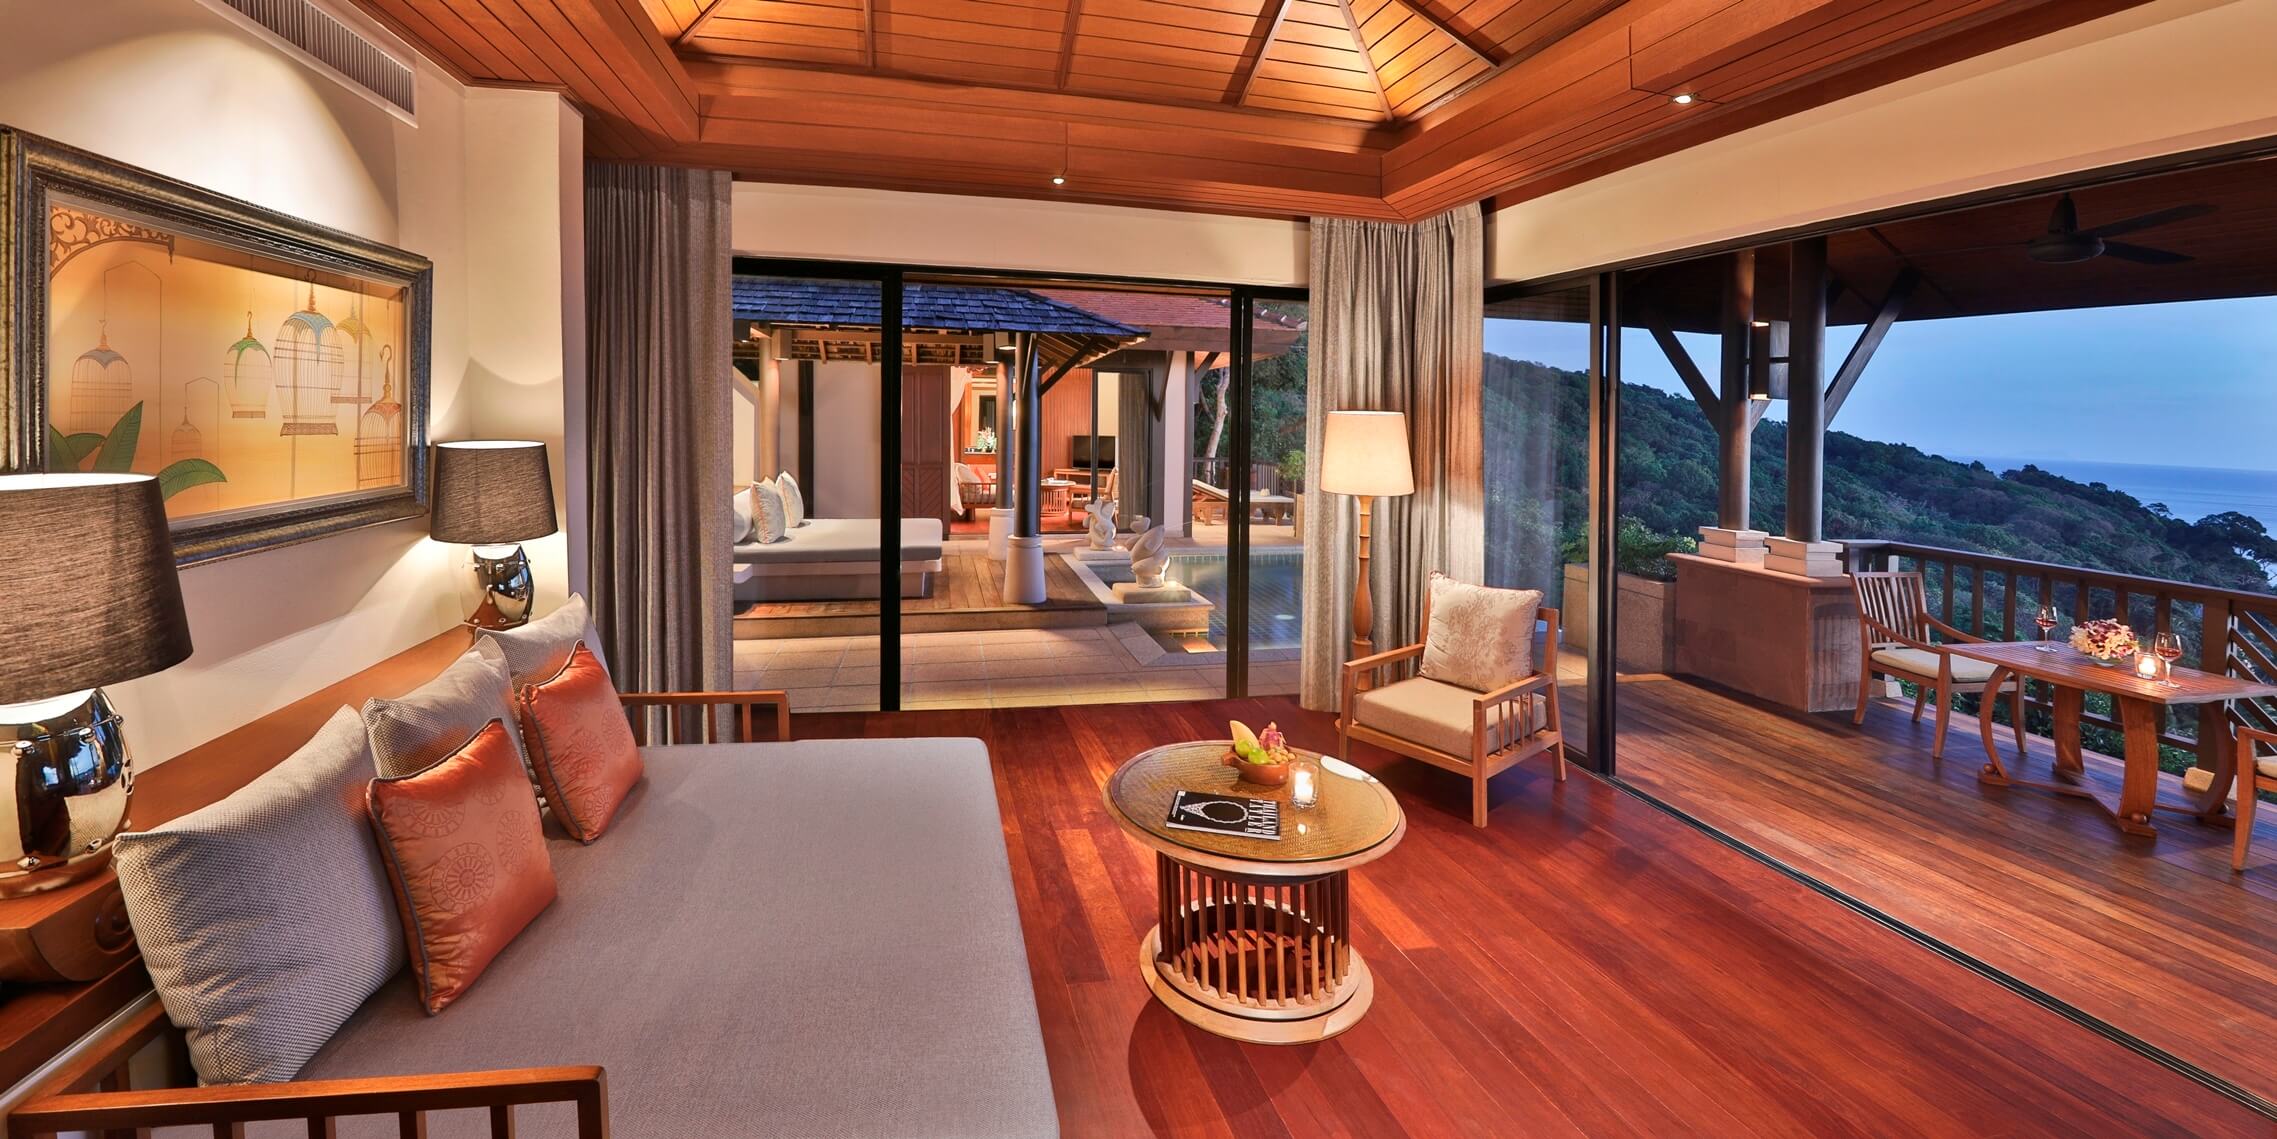 Pimalai’s one bedroom Hillside Ocean View Villa sets the stage for spectacular vacations, overlooking the Andaman Sea